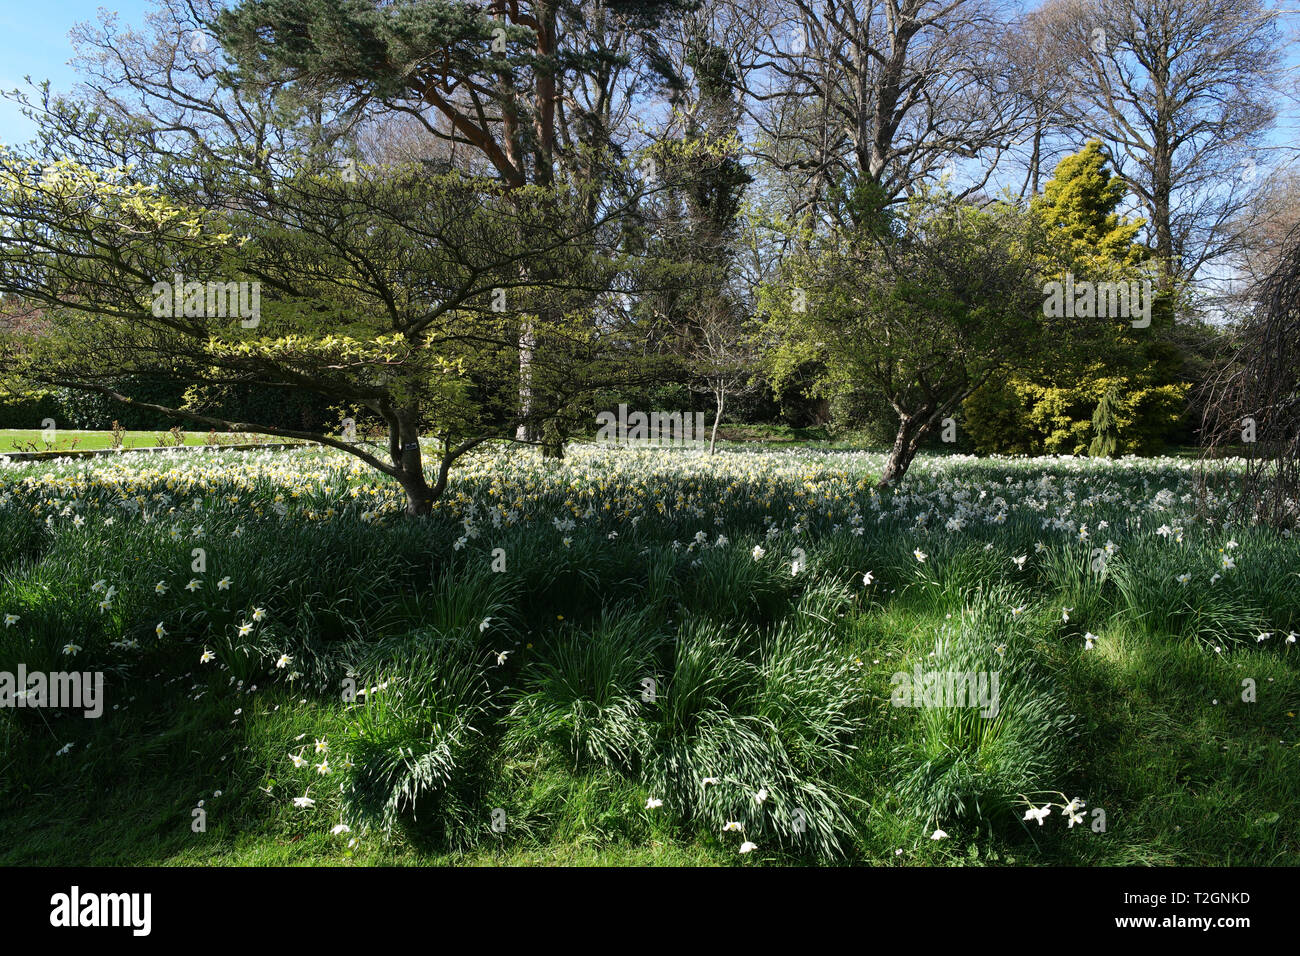 Carpet of blooming daffodils under trees in park during spring season. Stock Photo